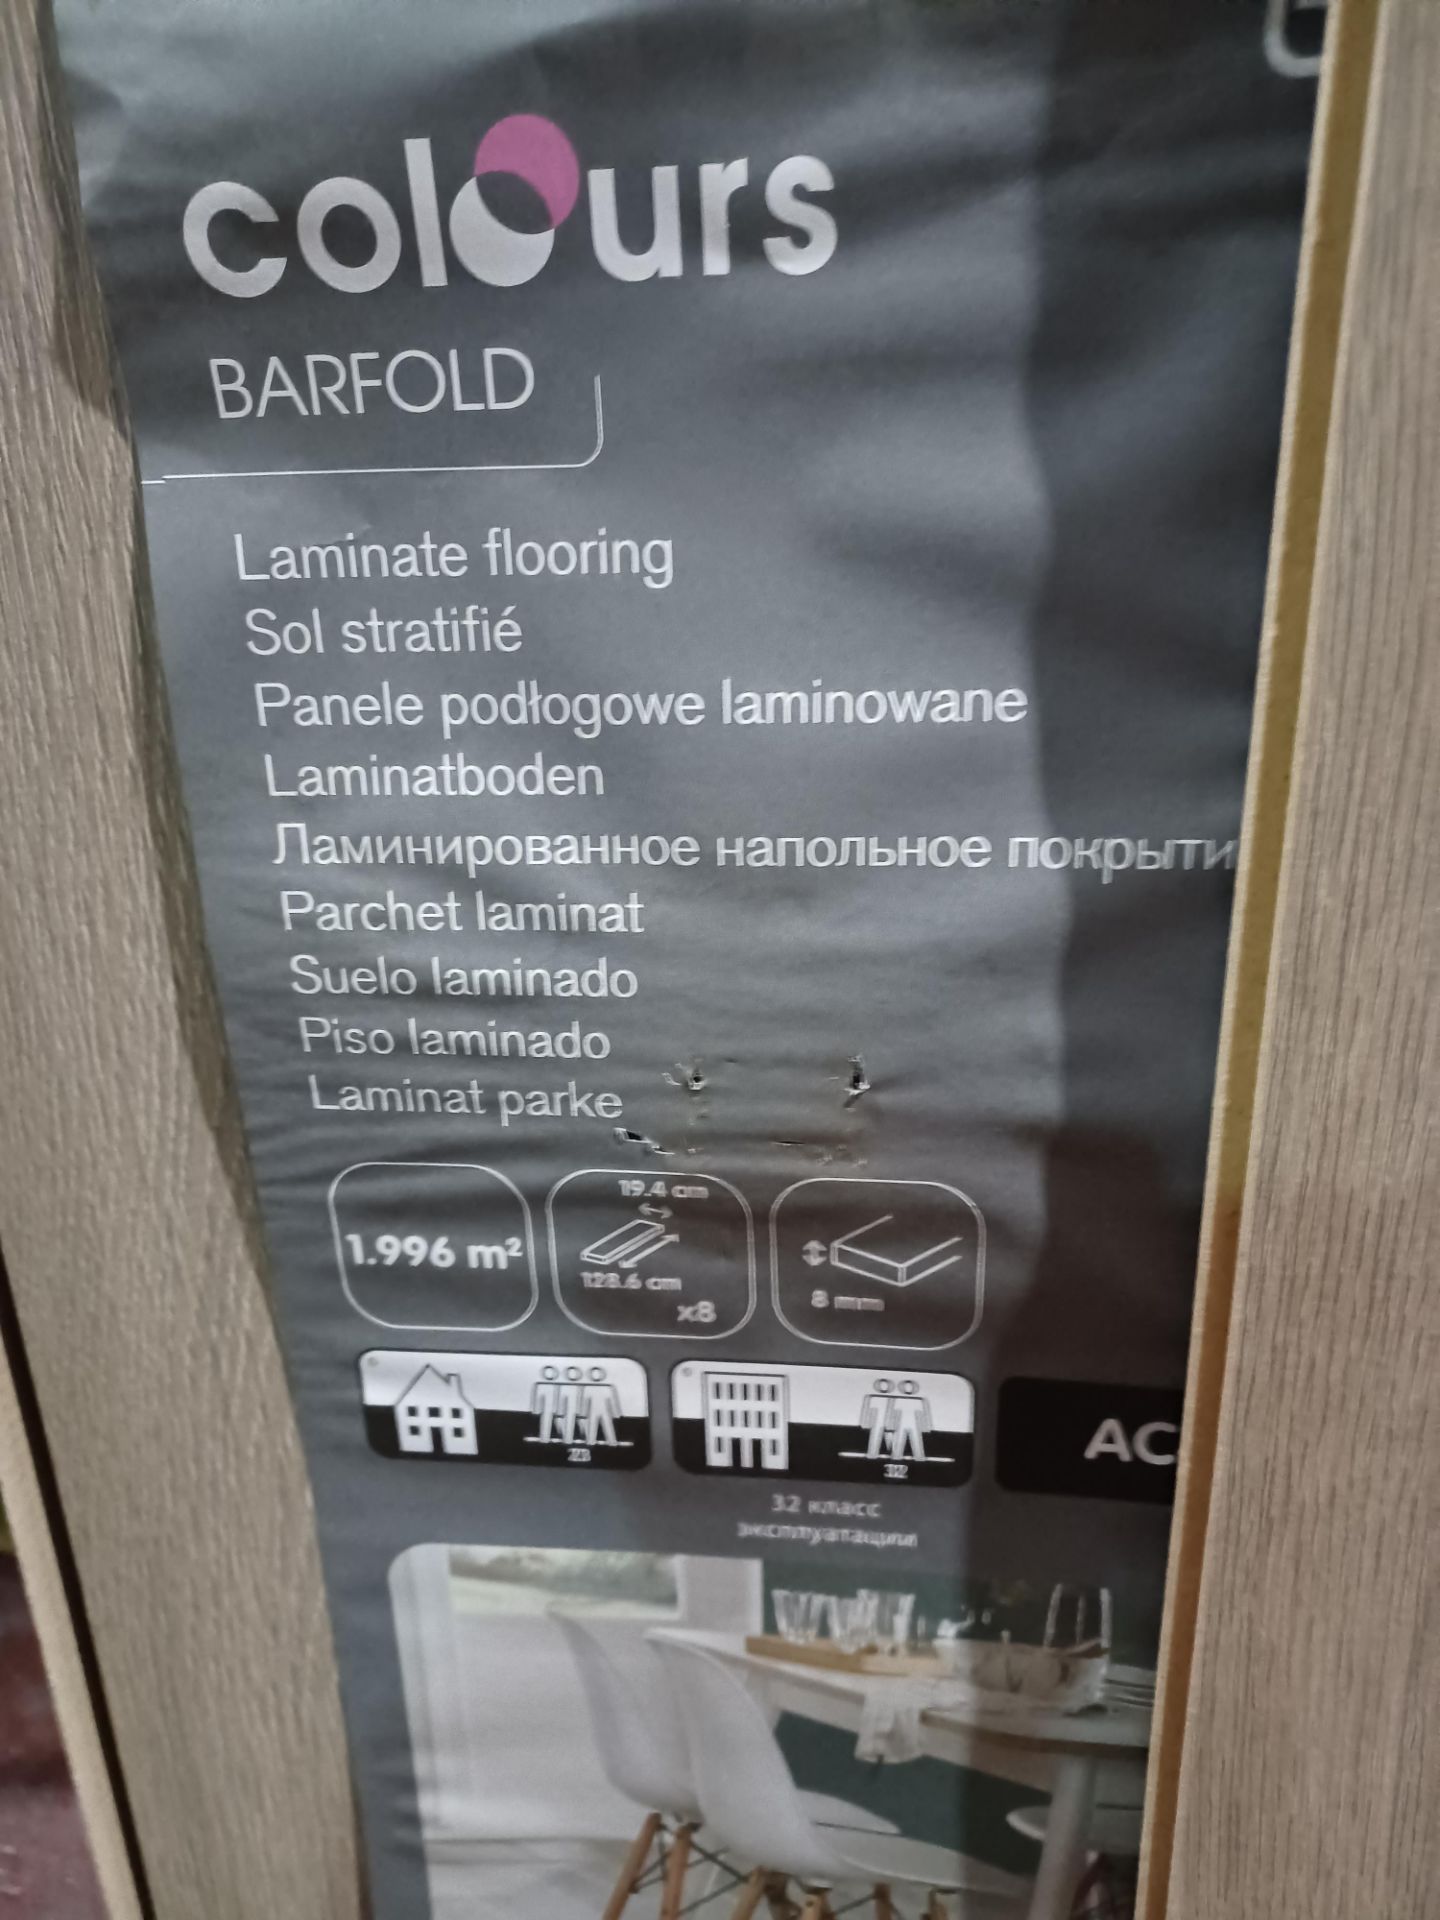 PALLET TO CONTAIN 12 x NEW PACKS OF BARFOLD CLICK FITTING LAMINATE FLOORING. EACH PACK CONTAINS 1. - Image 3 of 3